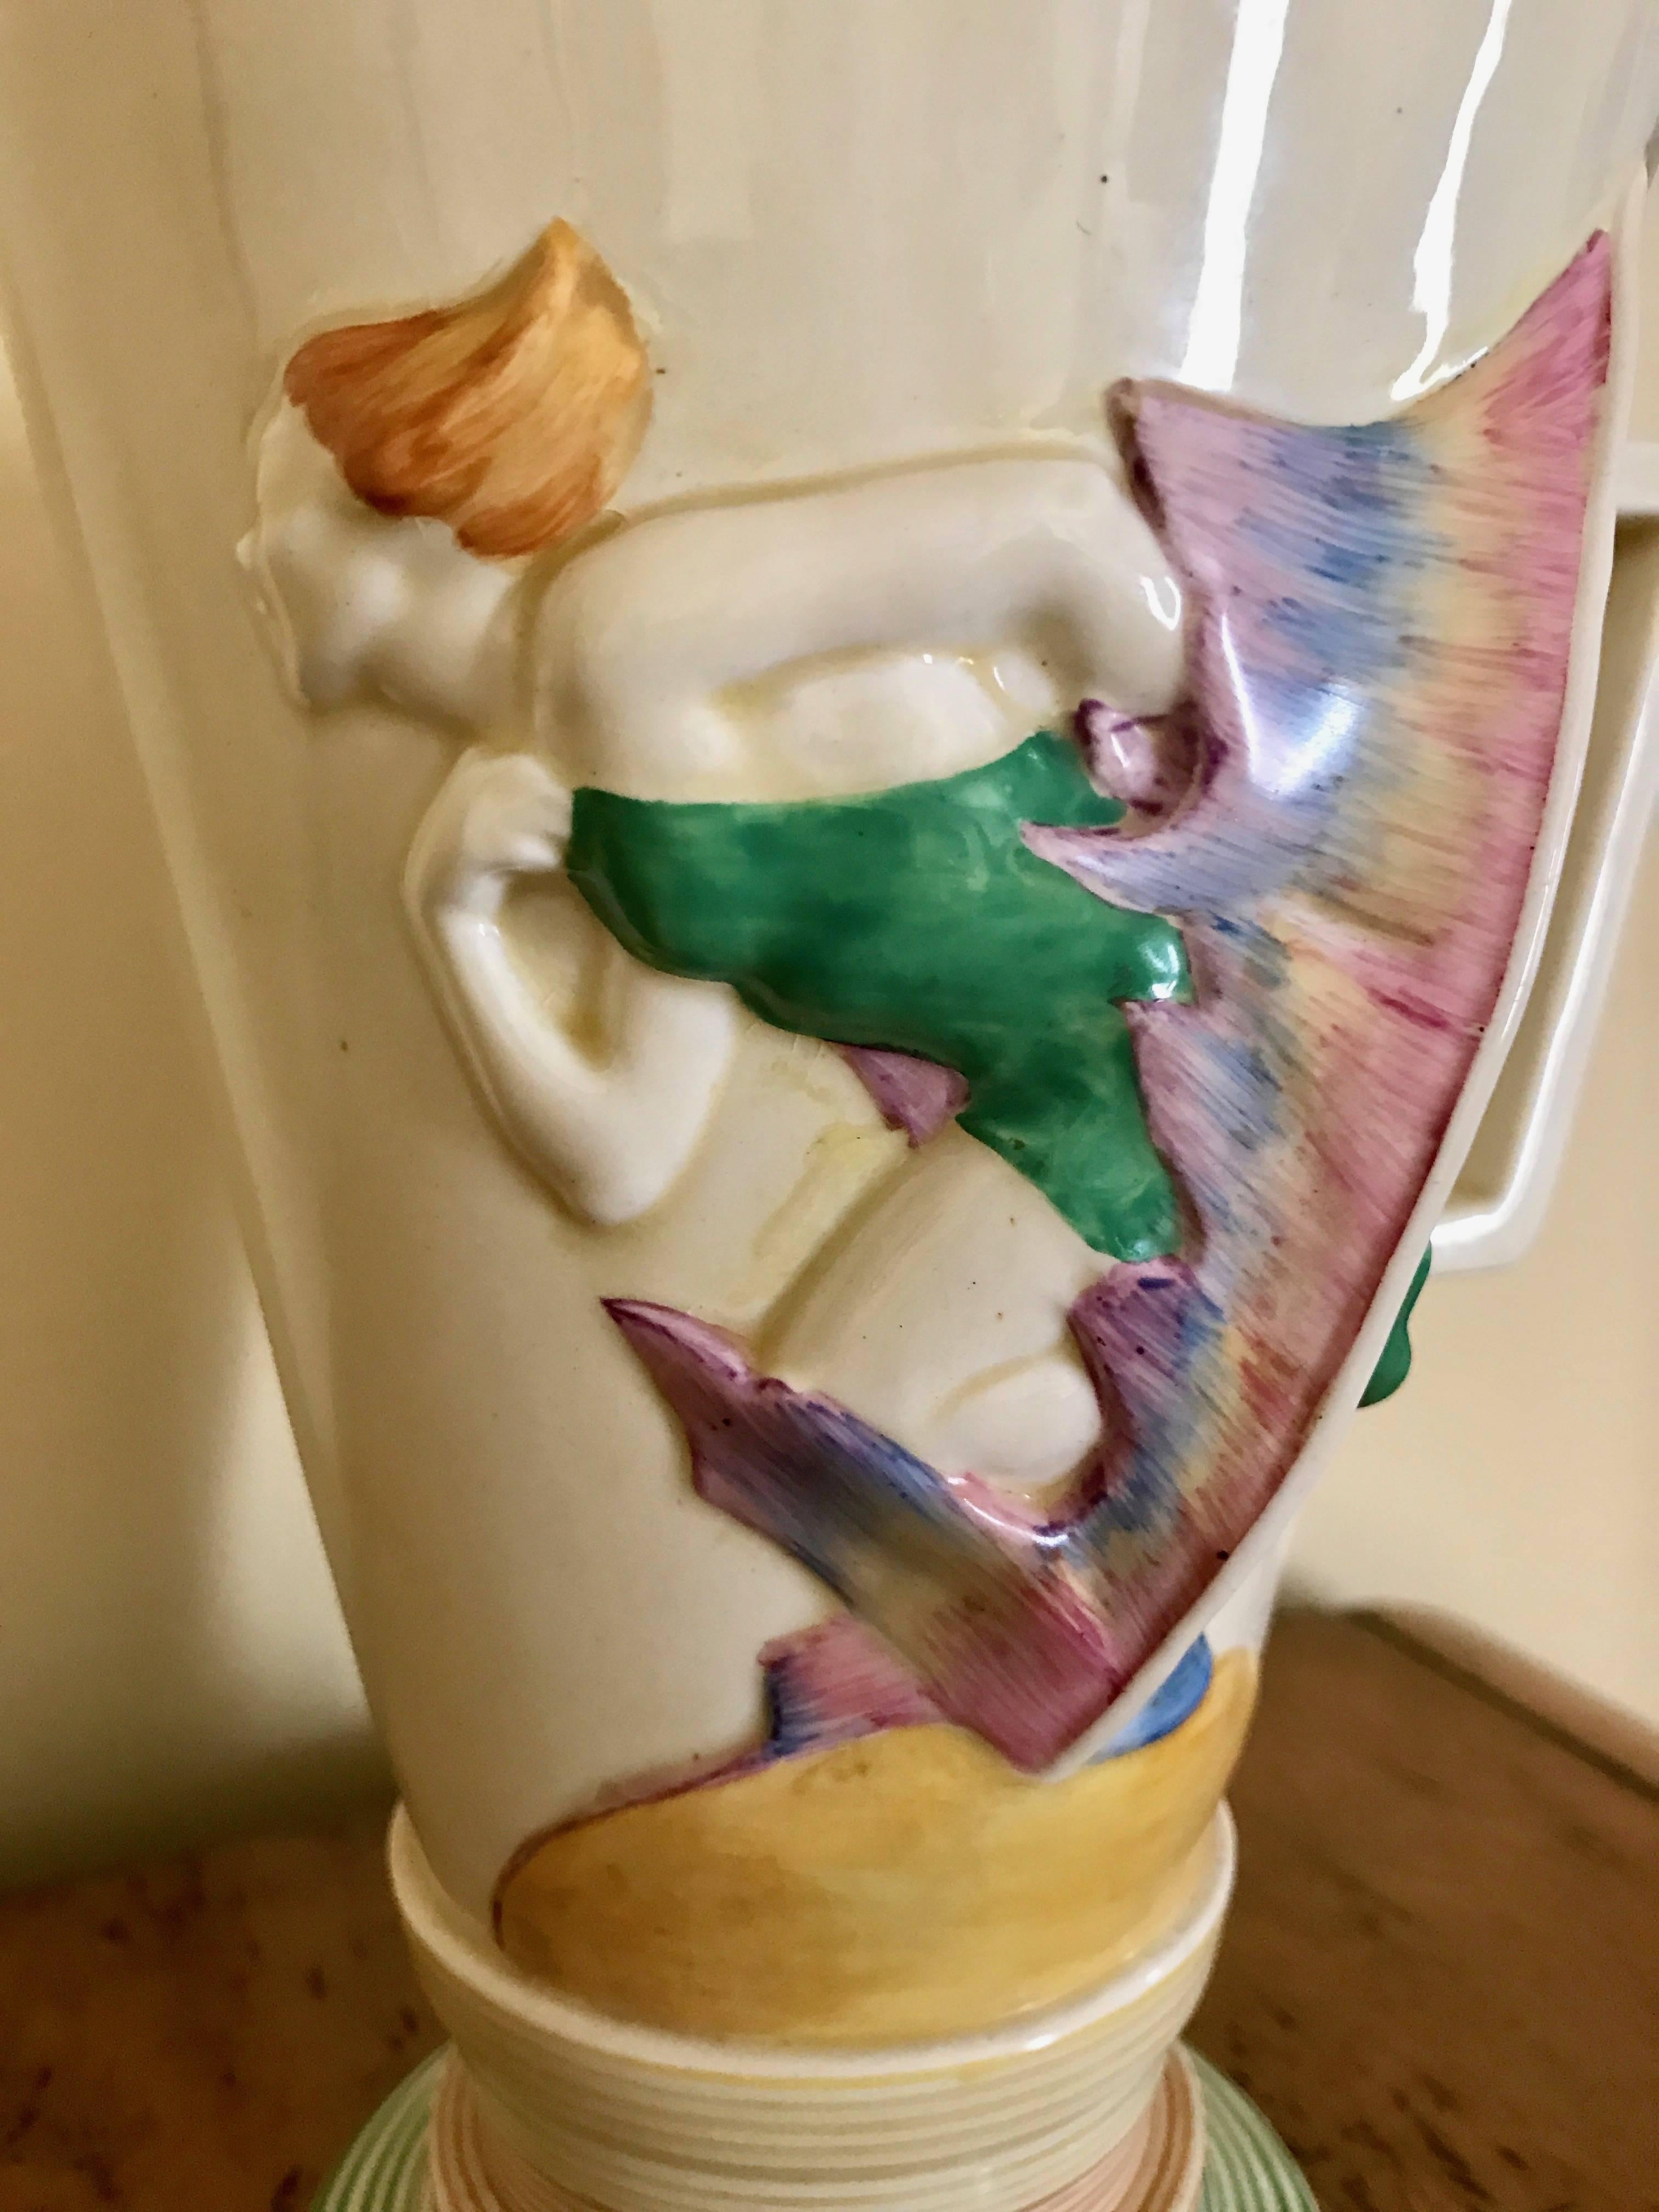 An Art Deco masterpiece from Clarice Cliff, famous for her line of Bizarre ware ceramics that introduced modernist, cubist, playful and bold themes into the conservative world of British ceramics and tableware. This dates from the period of 1930